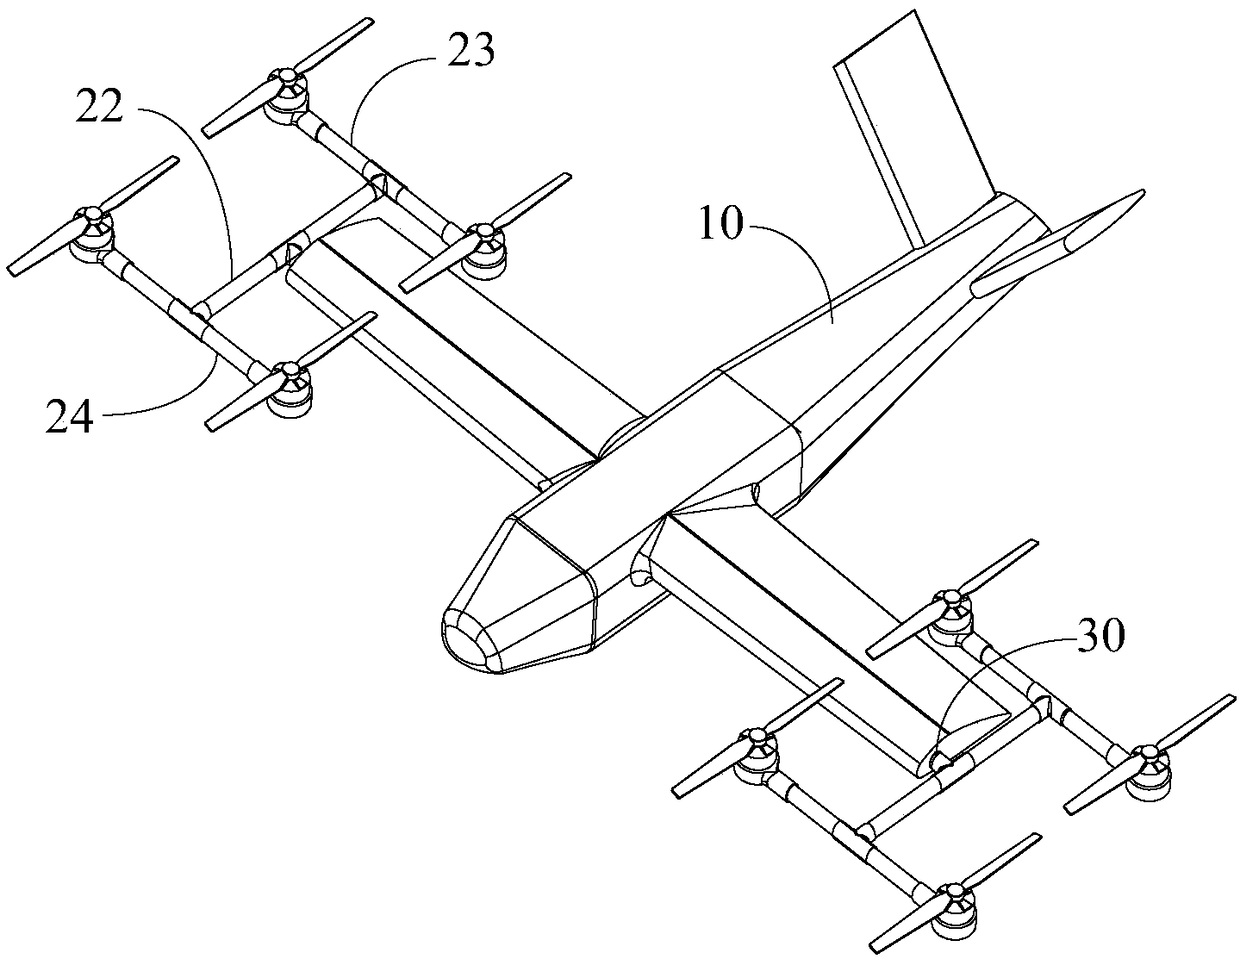 Multi-axis fixed-wing composite unmanned aerial vehicle and flight control method